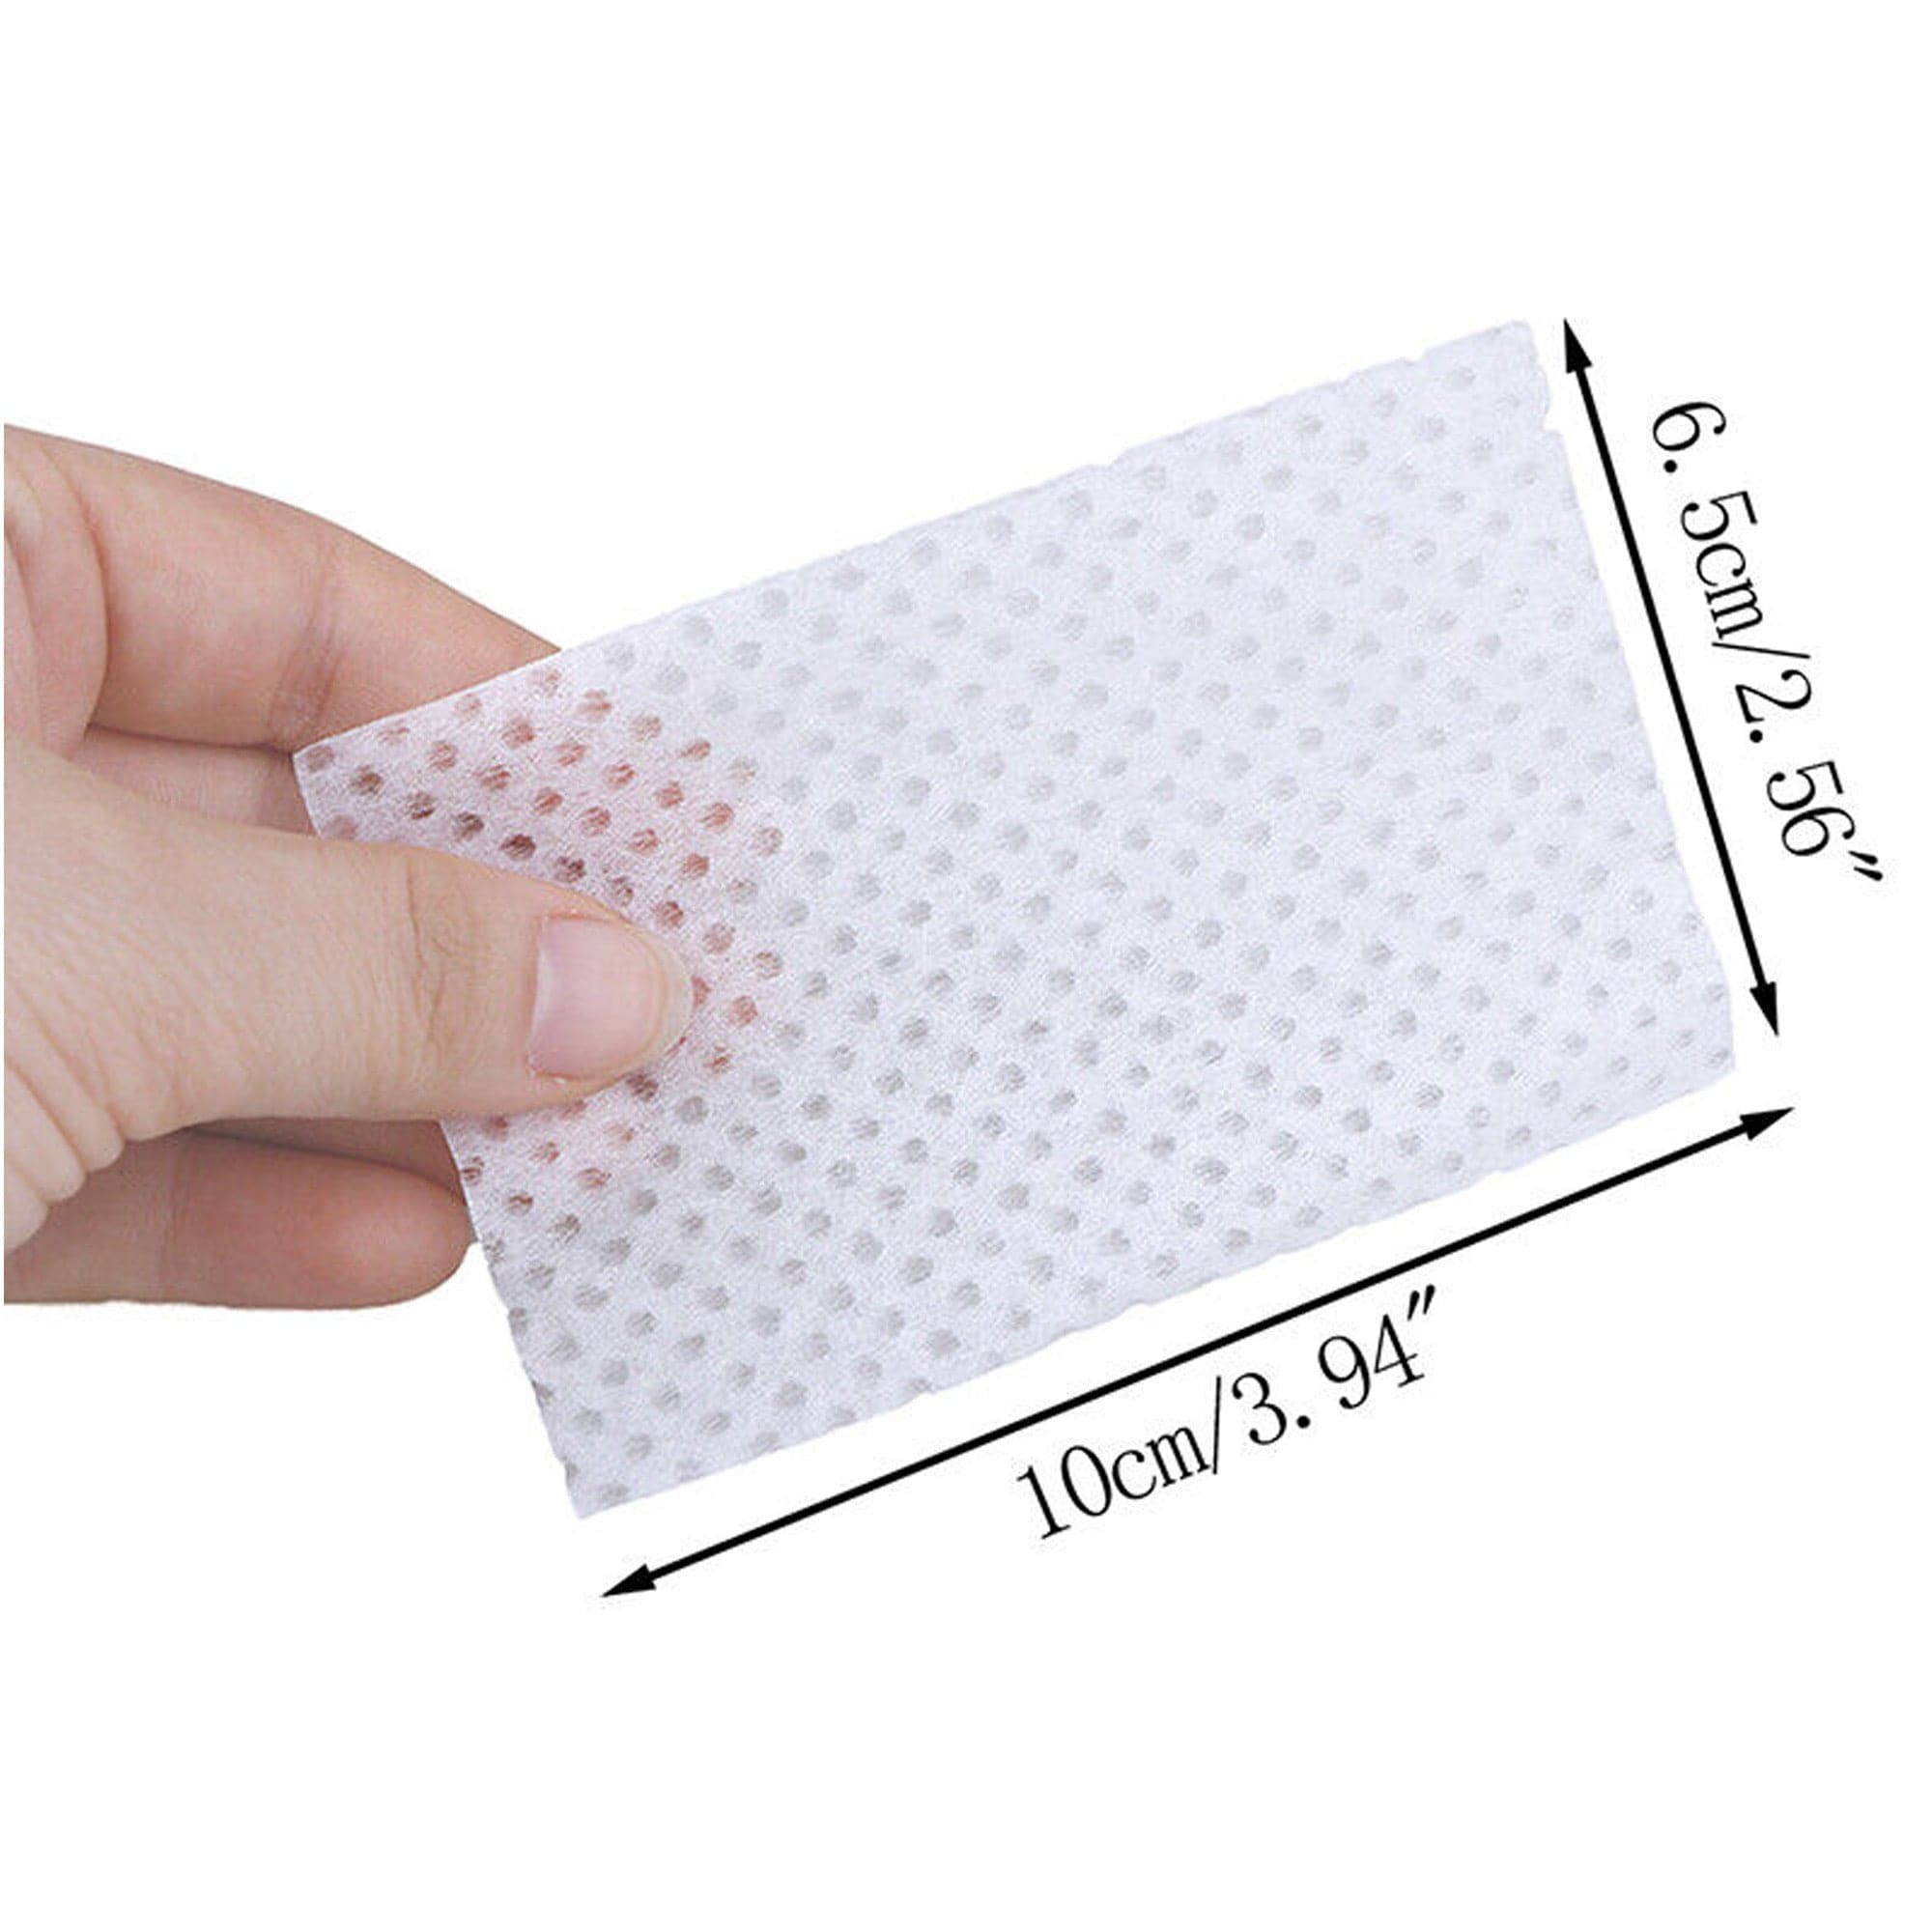 Eson - Perm End Papers Wet Strength 1000pcs (100x65mm)